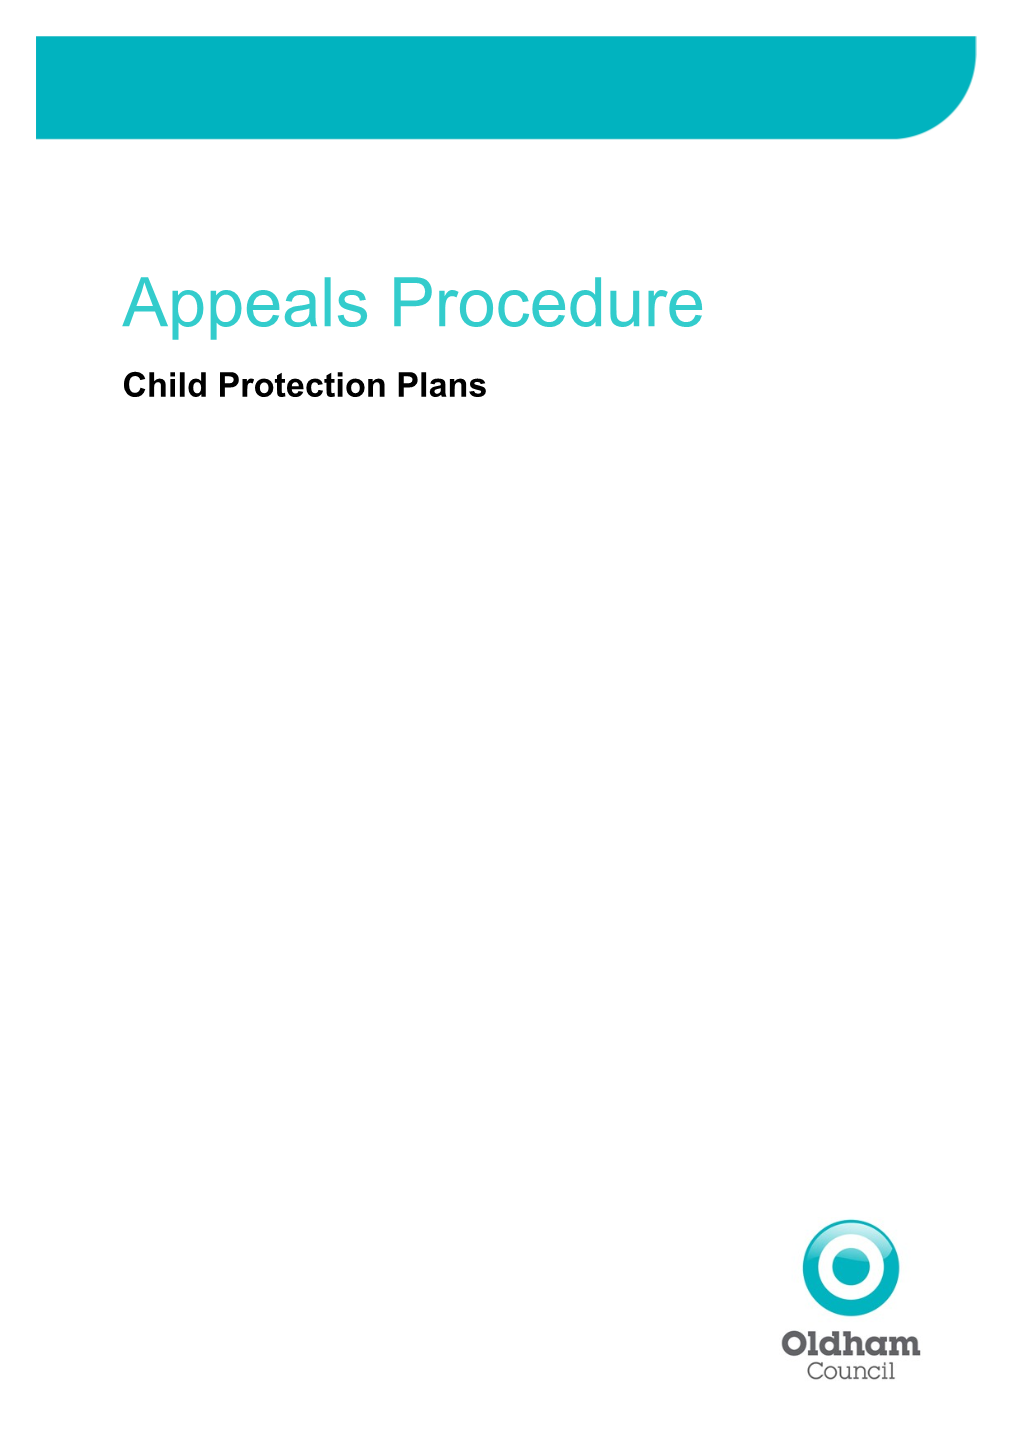 Child Protection Plans